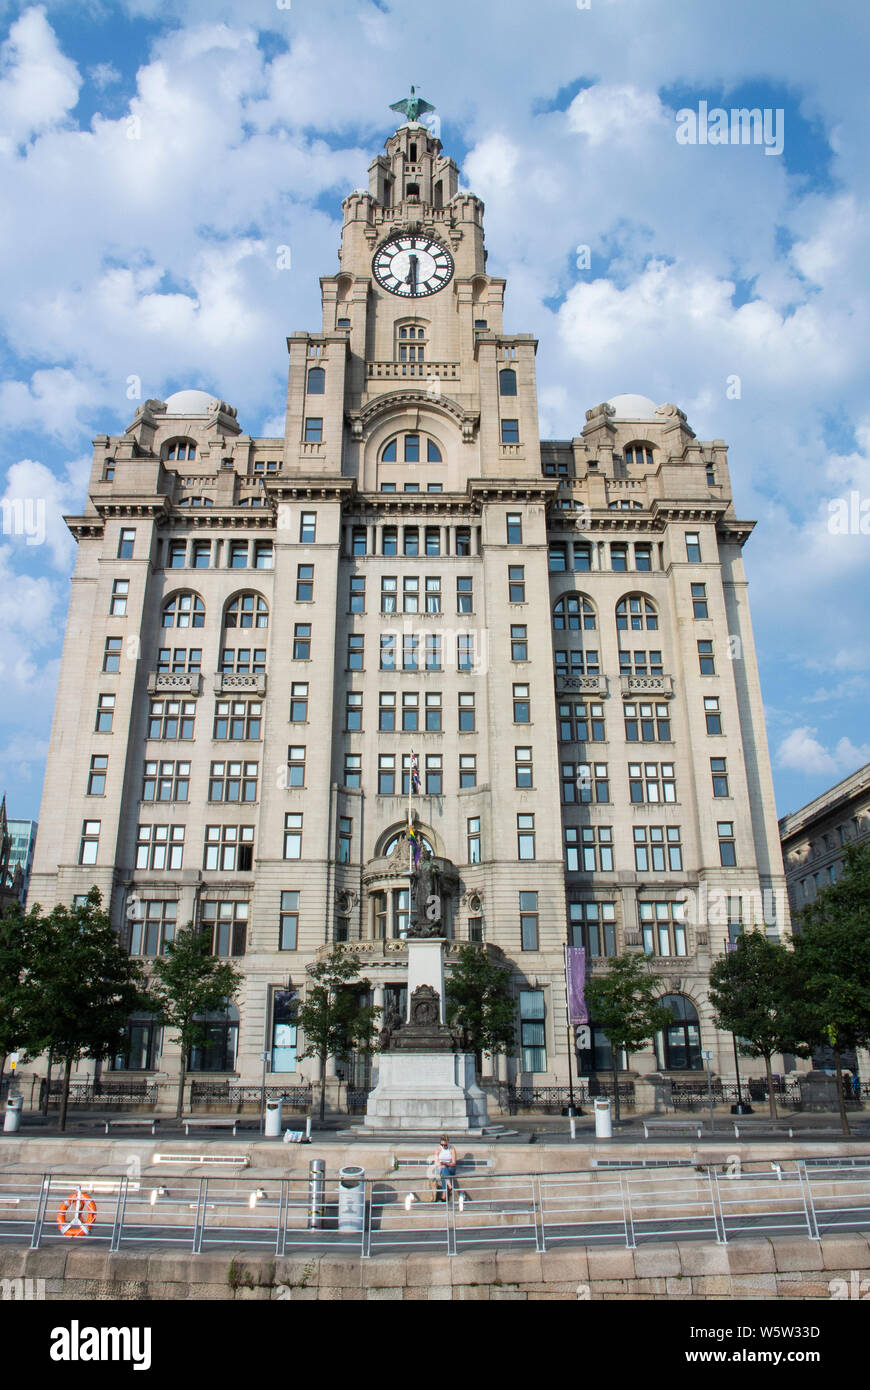 The Liver Building at Pier head in Liverpool, UK Stock Photo